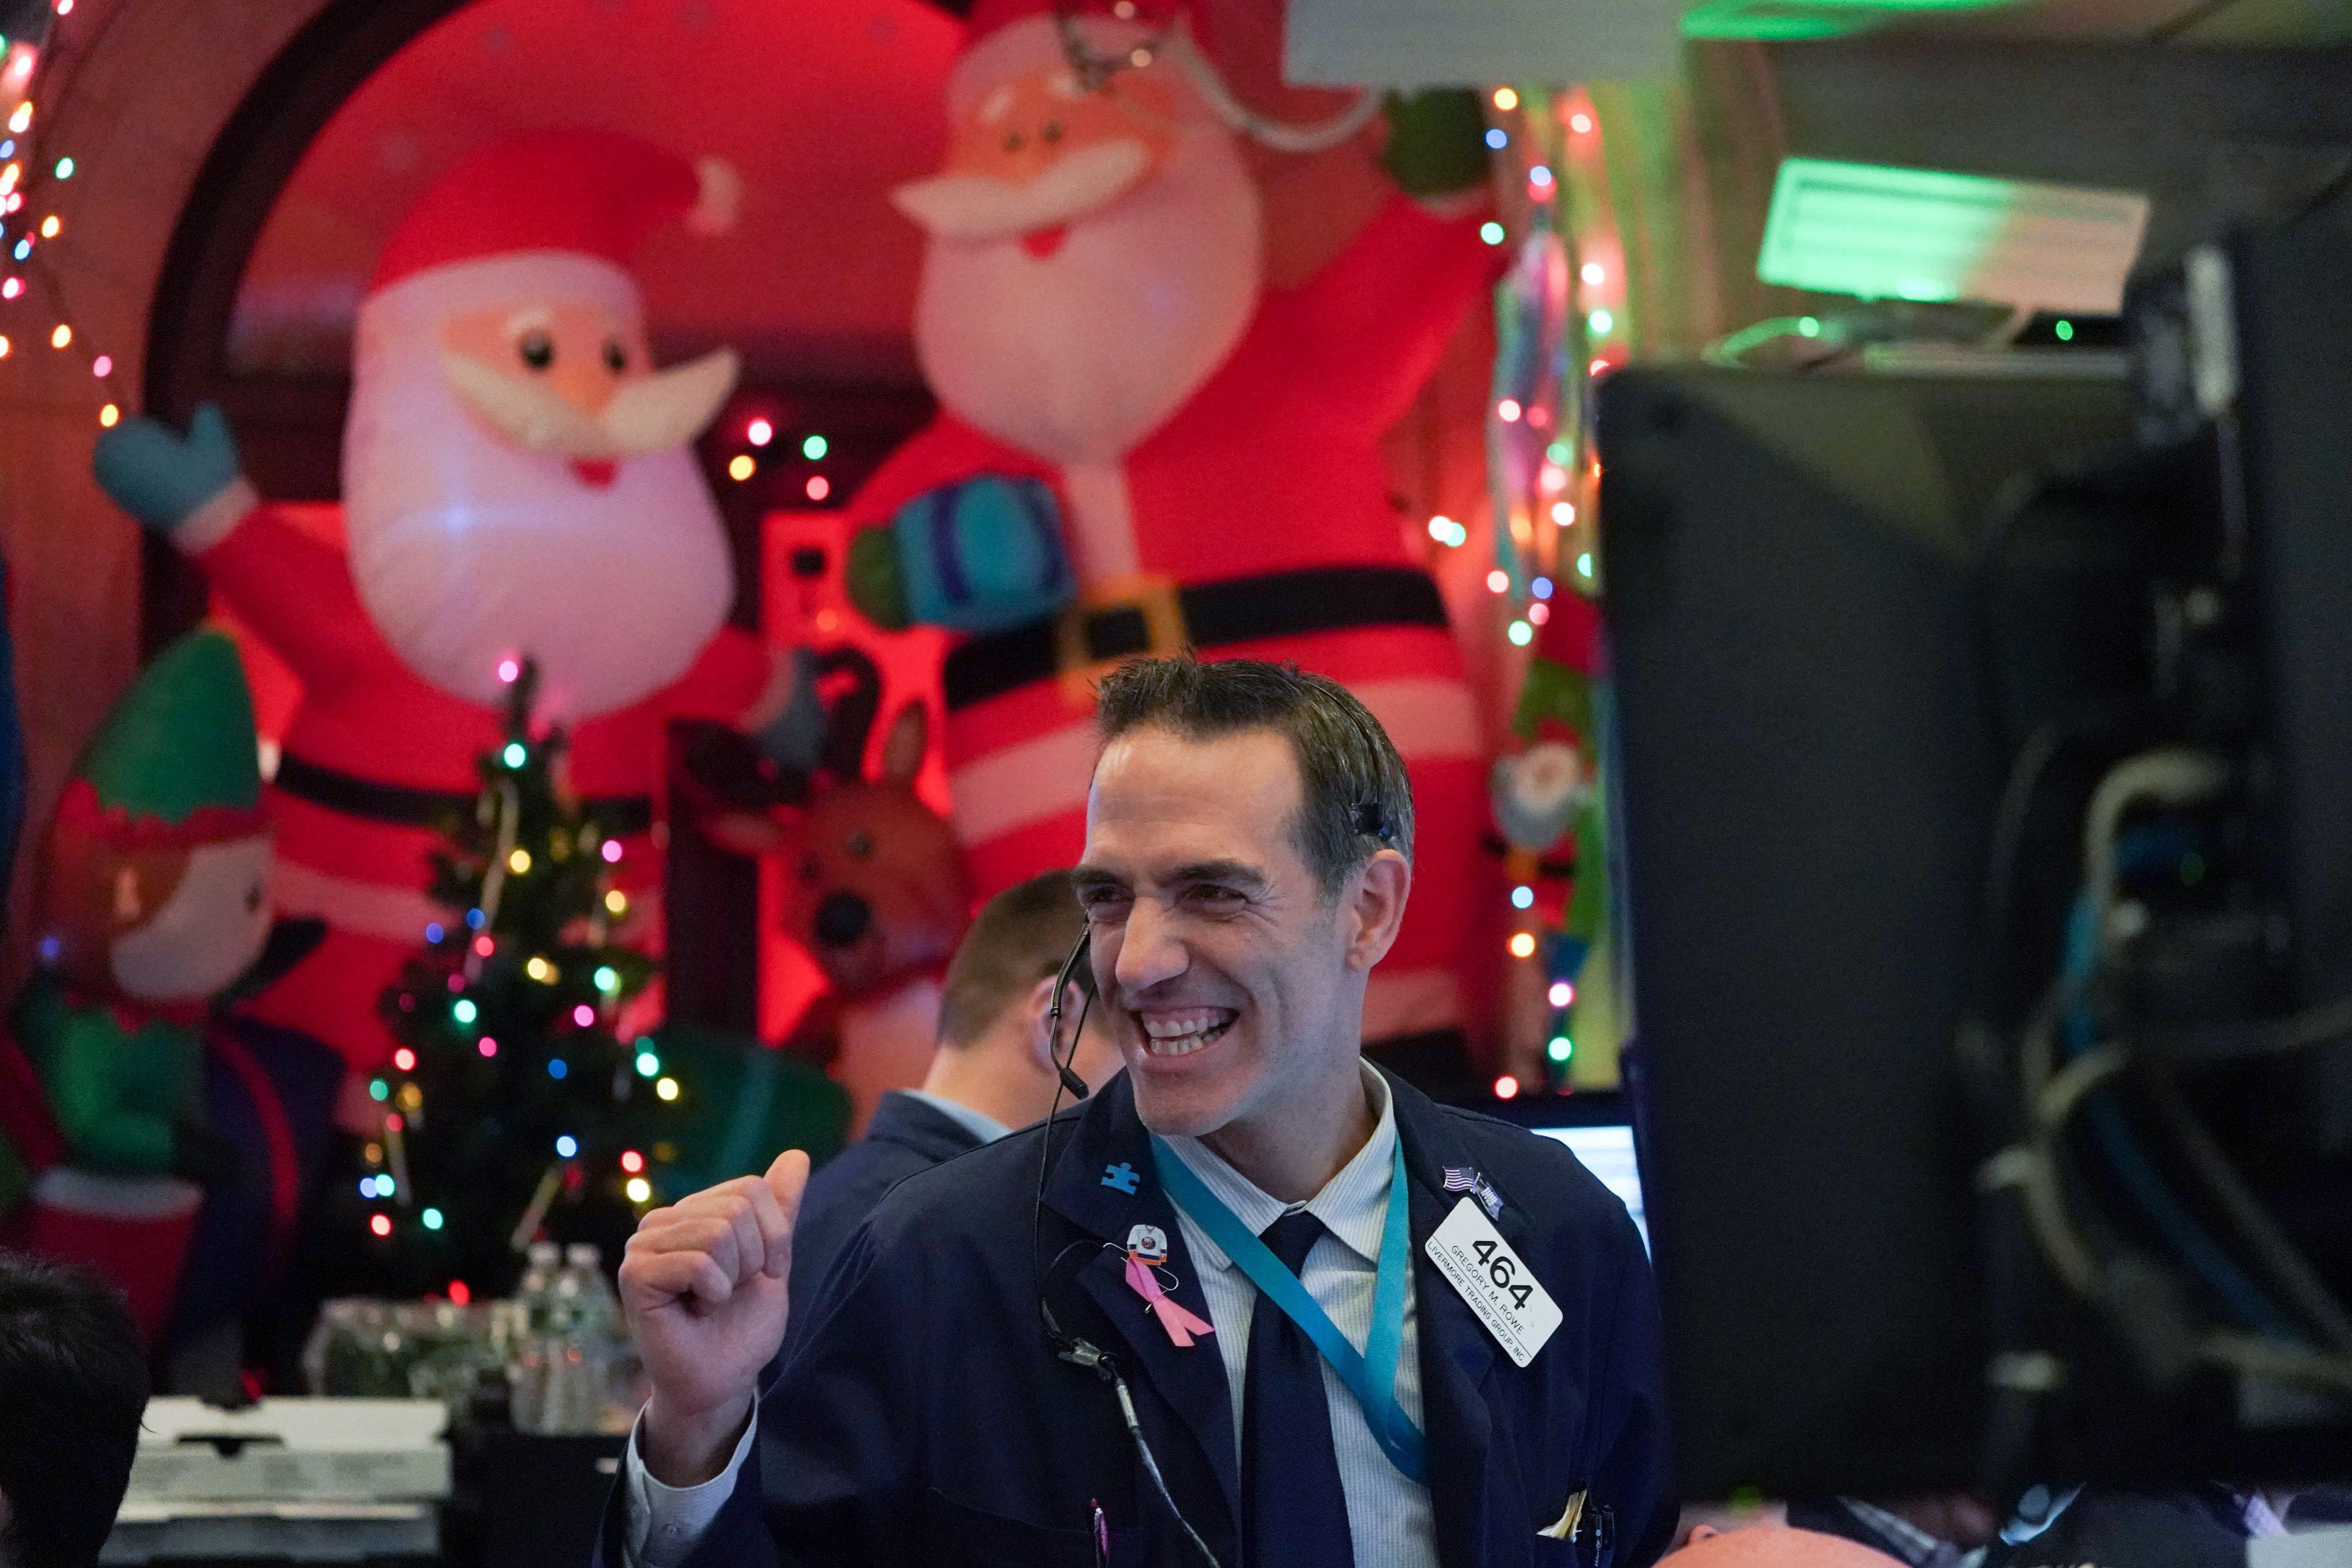 A trader pumps his fist at the closing bell of the New York Stock Exchange on Dec. 5. Inflatable Santas and other Christmas decorations are in the background.